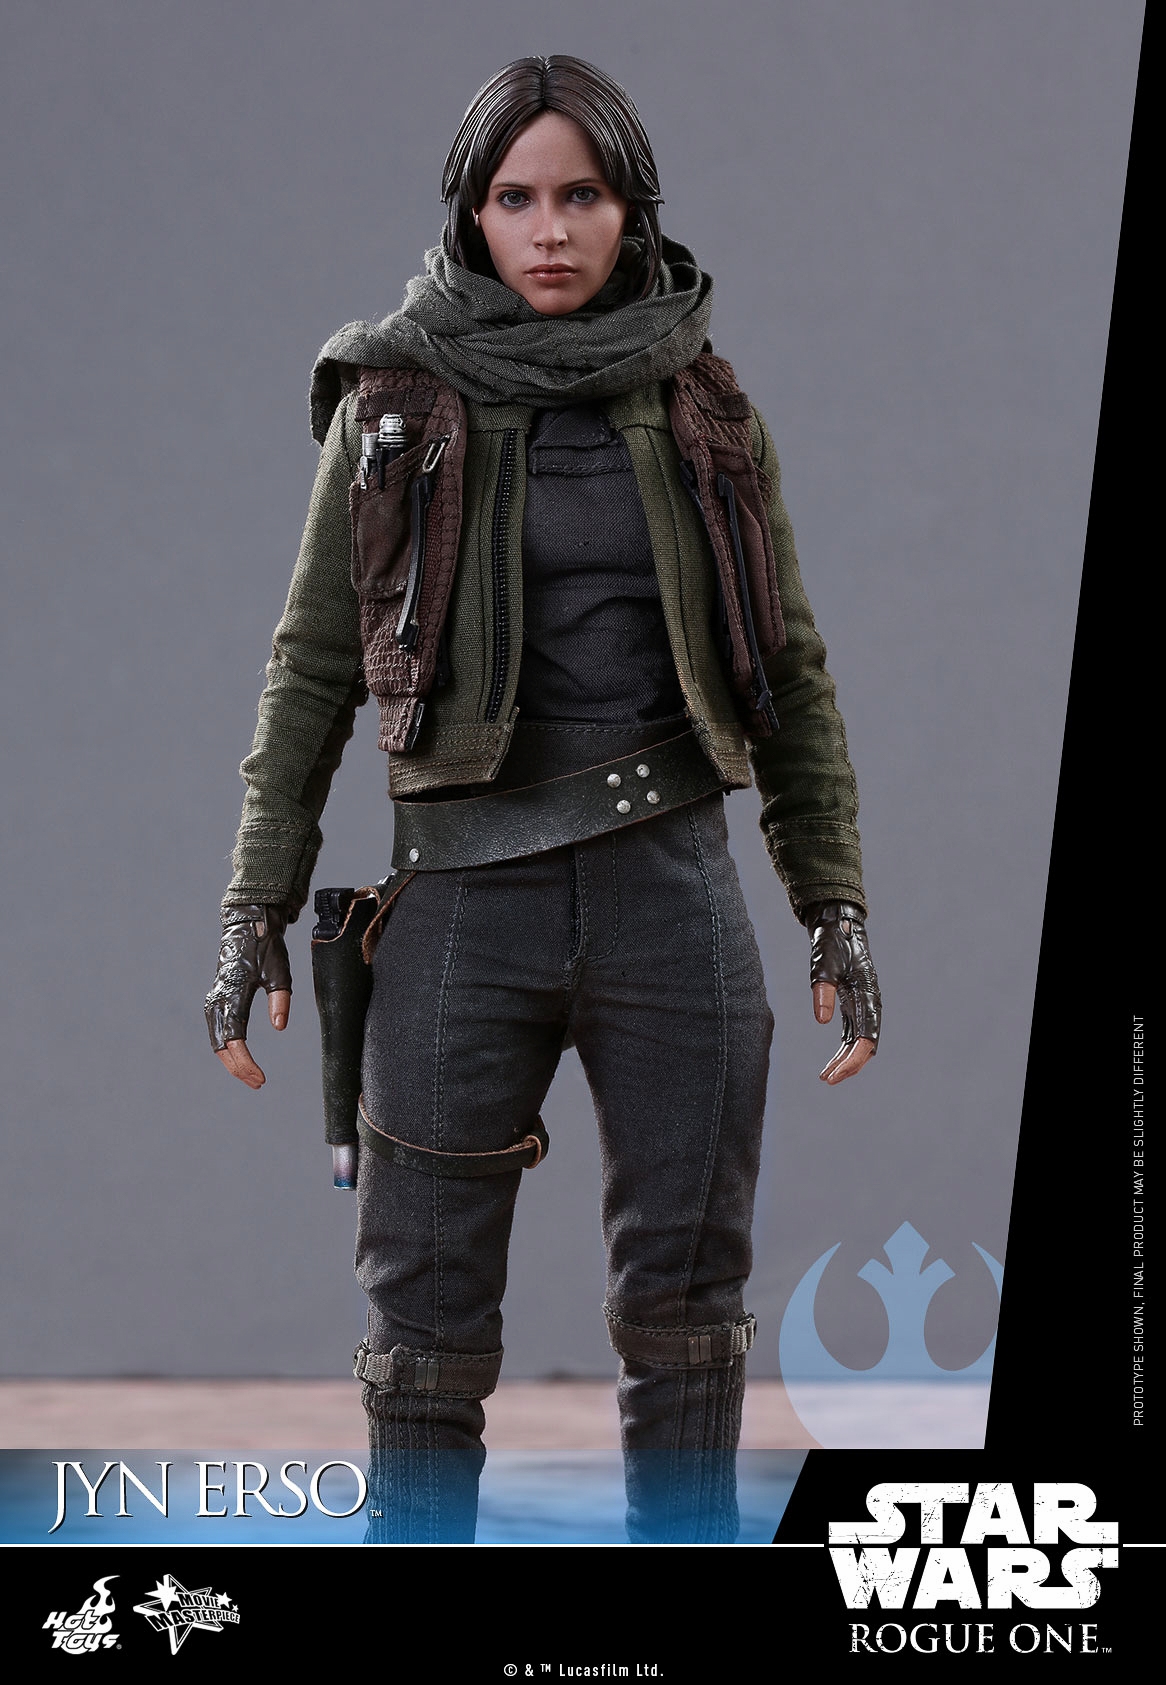 Hot-Toys-MMS404-Rogue-One-Jyn-Erso-Collectible-Figure-007.jpg